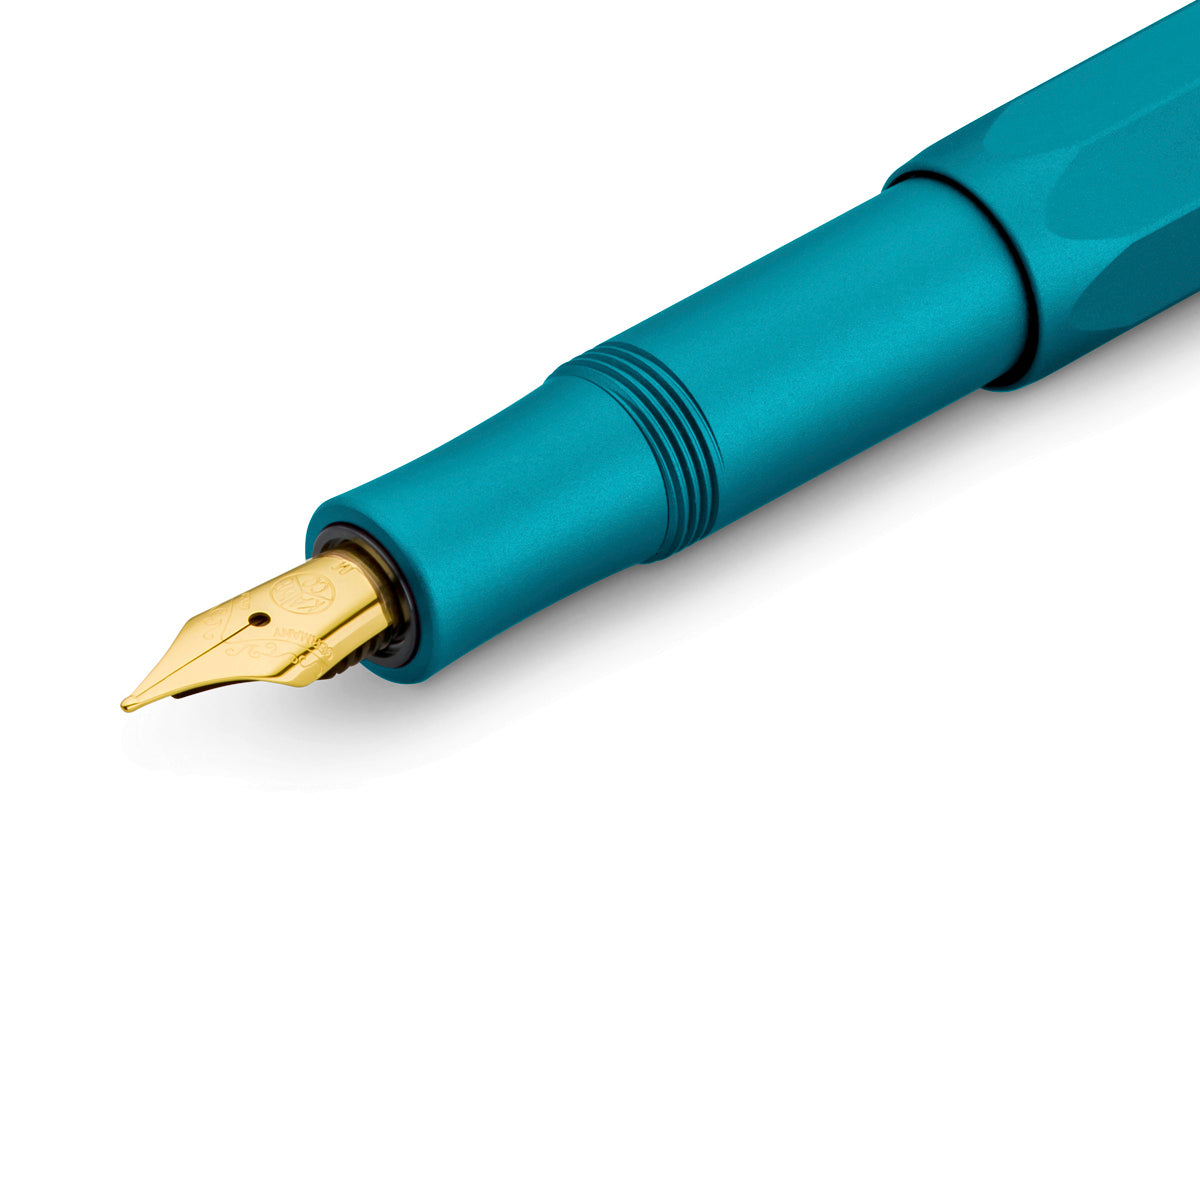 Close-up view of a turquoise fountain pen with a gleaming gold nib.